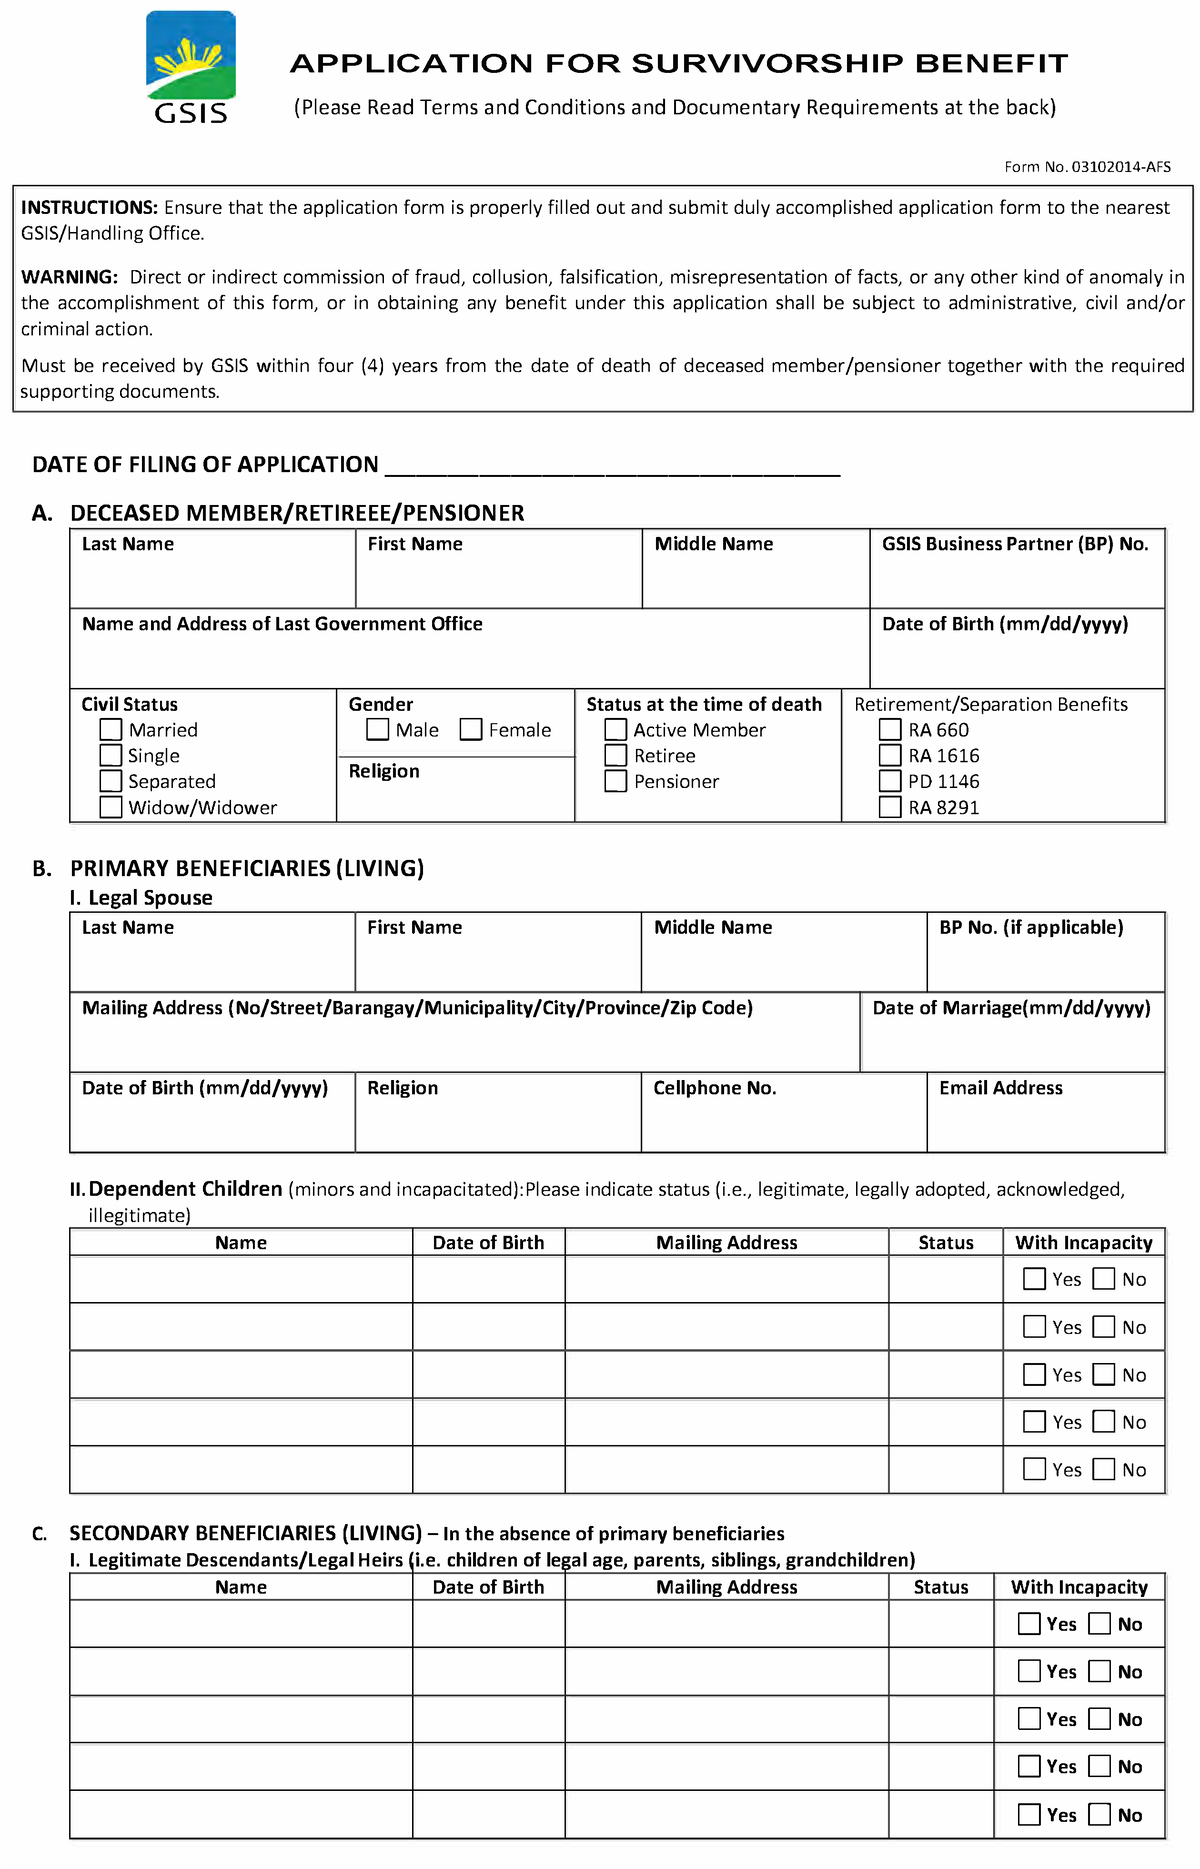 202004 03 Forms Afs Survivorship Gsis Form No Afs Instructions Ensure That The Application 9903